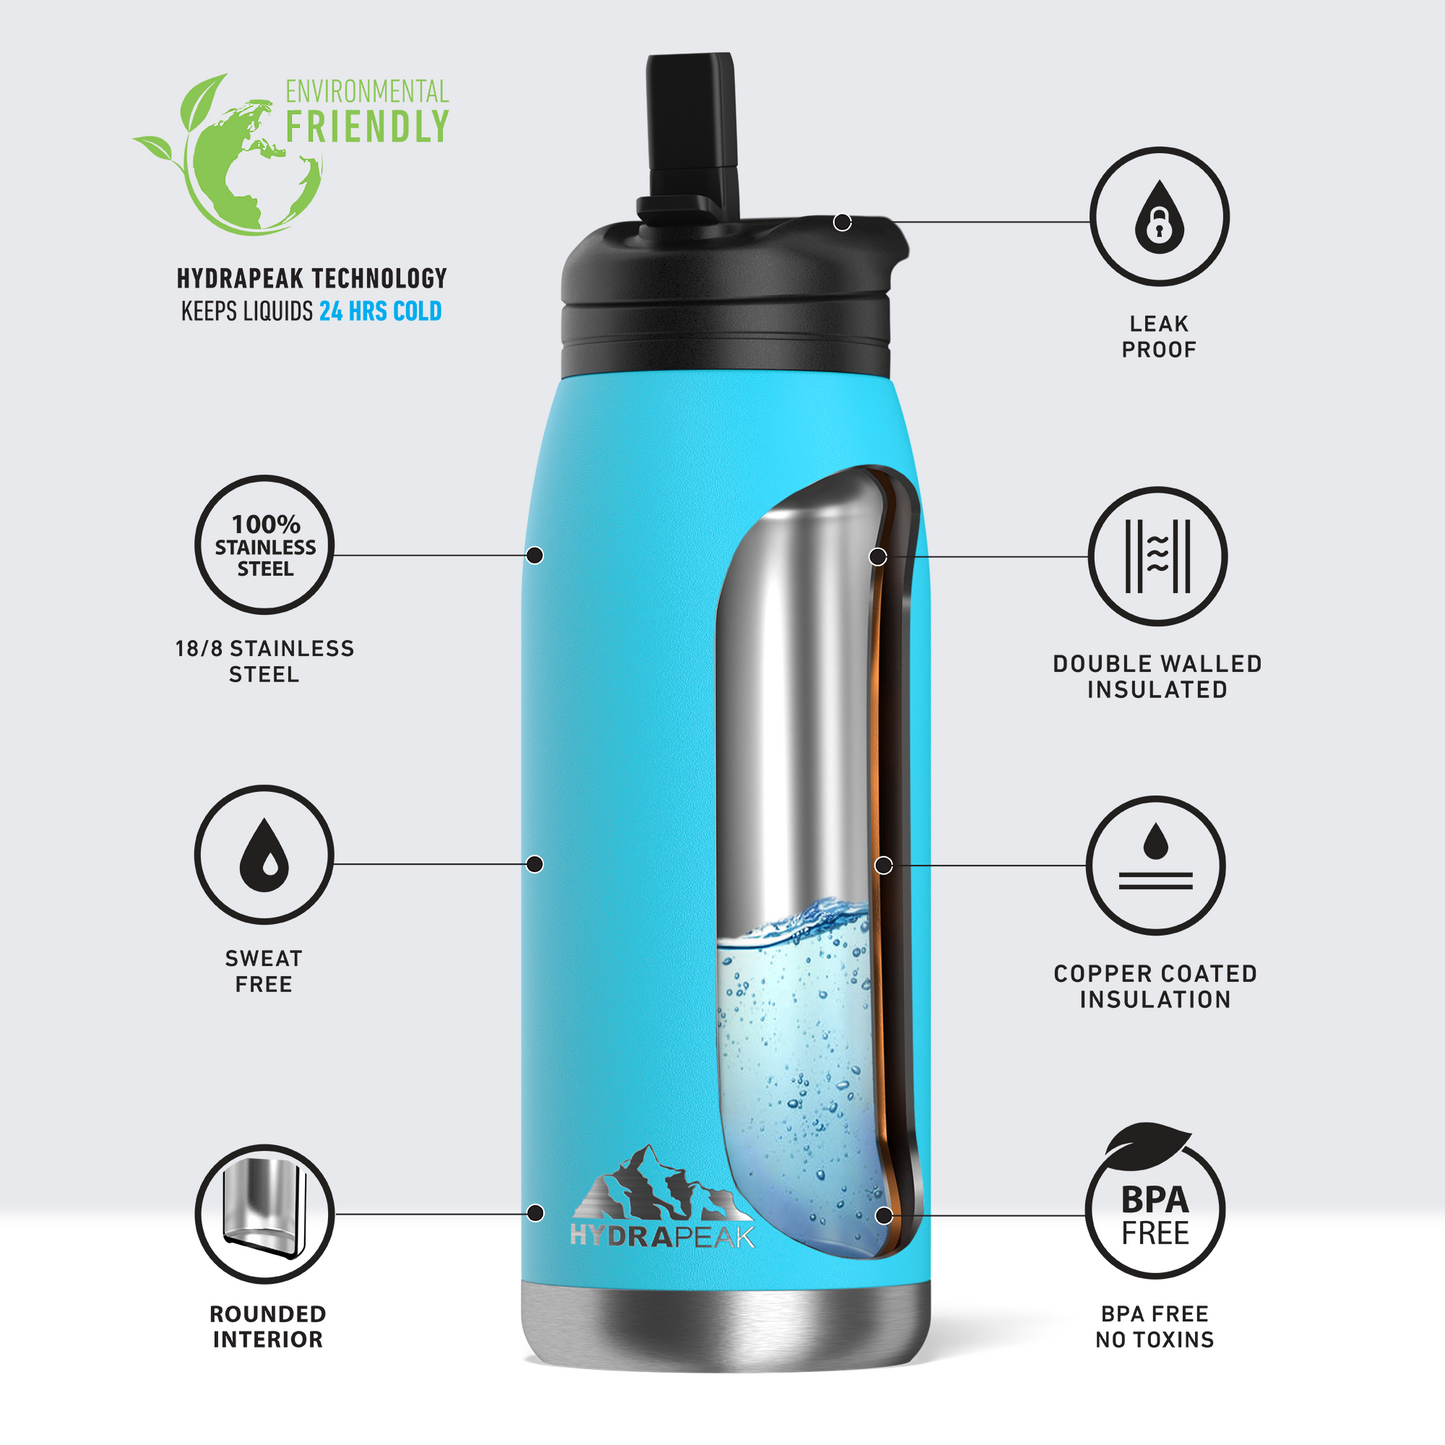 Flow 32oz Stainless Steel Insulated Water Bottle with Straw Lid Bottle- Ocean